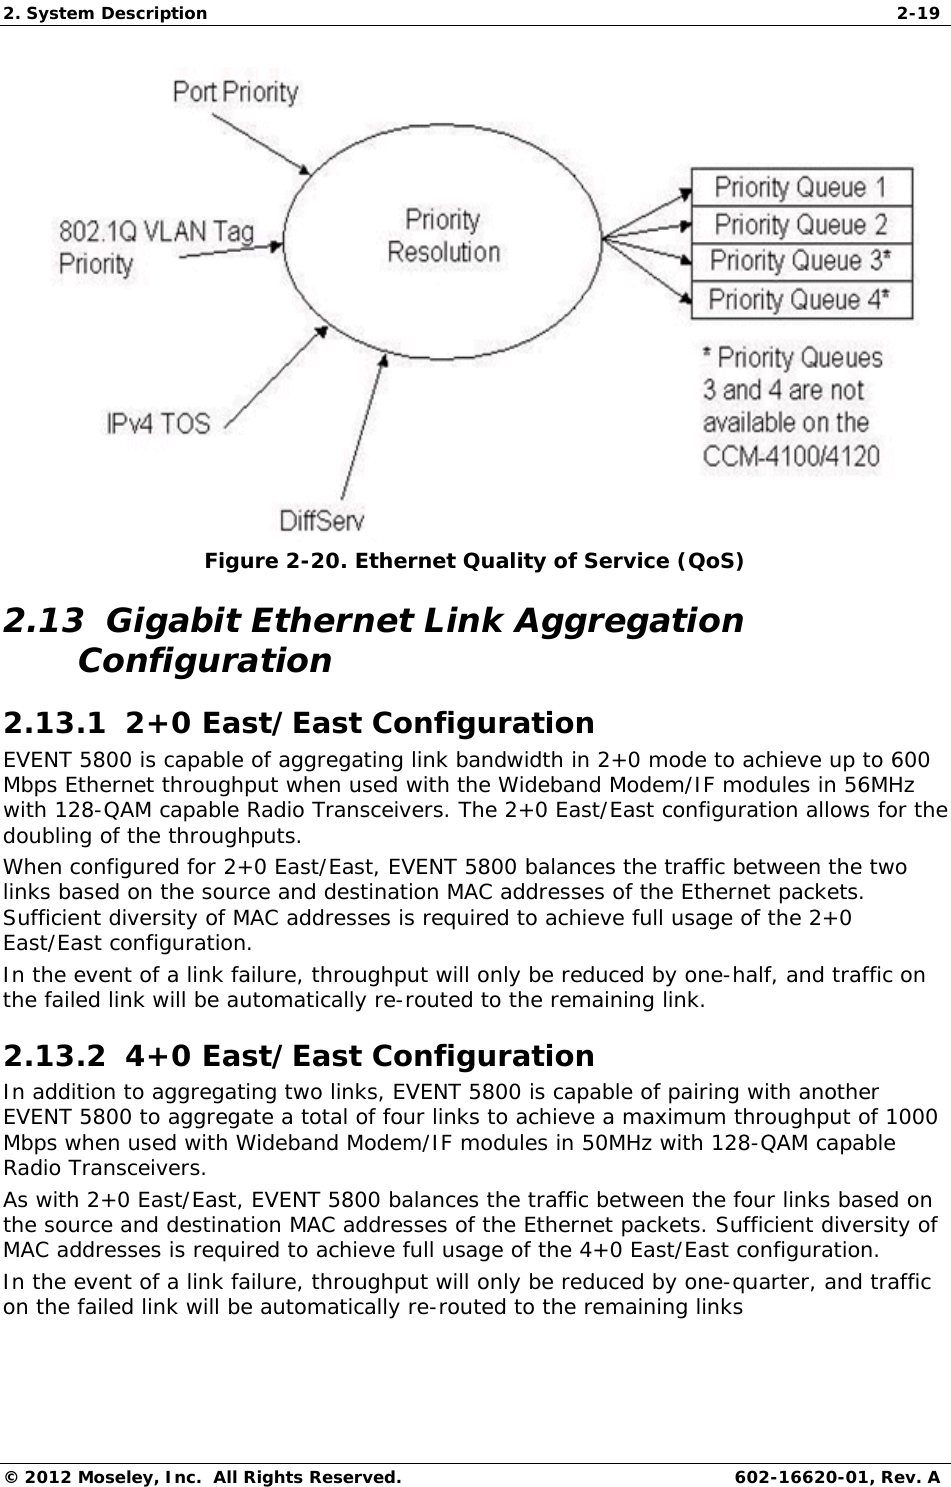 2. System Description  2-19 © 2012 Moseley, Inc.  All Rights Reserved.  602-16620-01, Rev. A  Figure 2-20. Ethernet Quality of Service (QoS) 2.13  Gigabit Ethernet Link Aggregation Configuration 2.13.1  2+0 East/East Configuration  EVENT 5800 is capable of aggregating link bandwidth in 2+0 mode to achieve up to 600 Mbps Ethernet throughput when used with the Wideband Modem/IF modules in 56MHz with 128-QAM capable Radio Transceivers. The 2+0 East/East configuration allows for the doubling of the throughputs.  When configured for 2+0 East/East, EVENT 5800 balances the traffic between the two links based on the source and destination MAC addresses of the Ethernet packets. Sufficient diversity of MAC addresses is required to achieve full usage of the 2+0 East/East configuration.  In the event of a link failure, throughput will only be reduced by one-half, and traffic on the failed link will be automatically re-routed to the remaining link.  2.13.2  4+0 East/East Configuration  In addition to aggregating two links, EVENT 5800 is capable of pairing with another EVENT 5800 to aggregate a total of four links to achieve a maximum throughput of 1000 Mbps when used with Wideband Modem/IF modules in 50MHz with 128-QAM capable Radio Transceivers. As with 2+0 East/East, EVENT 5800 balances the traffic between the four links based on the source and destination MAC addresses of the Ethernet packets. Sufficient diversity of MAC addresses is required to achieve full usage of the 4+0 East/East configuration.  In the event of a link failure, throughput will only be reduced by one-quarter, and traffic on the failed link will be automatically re-routed to the remaining links  